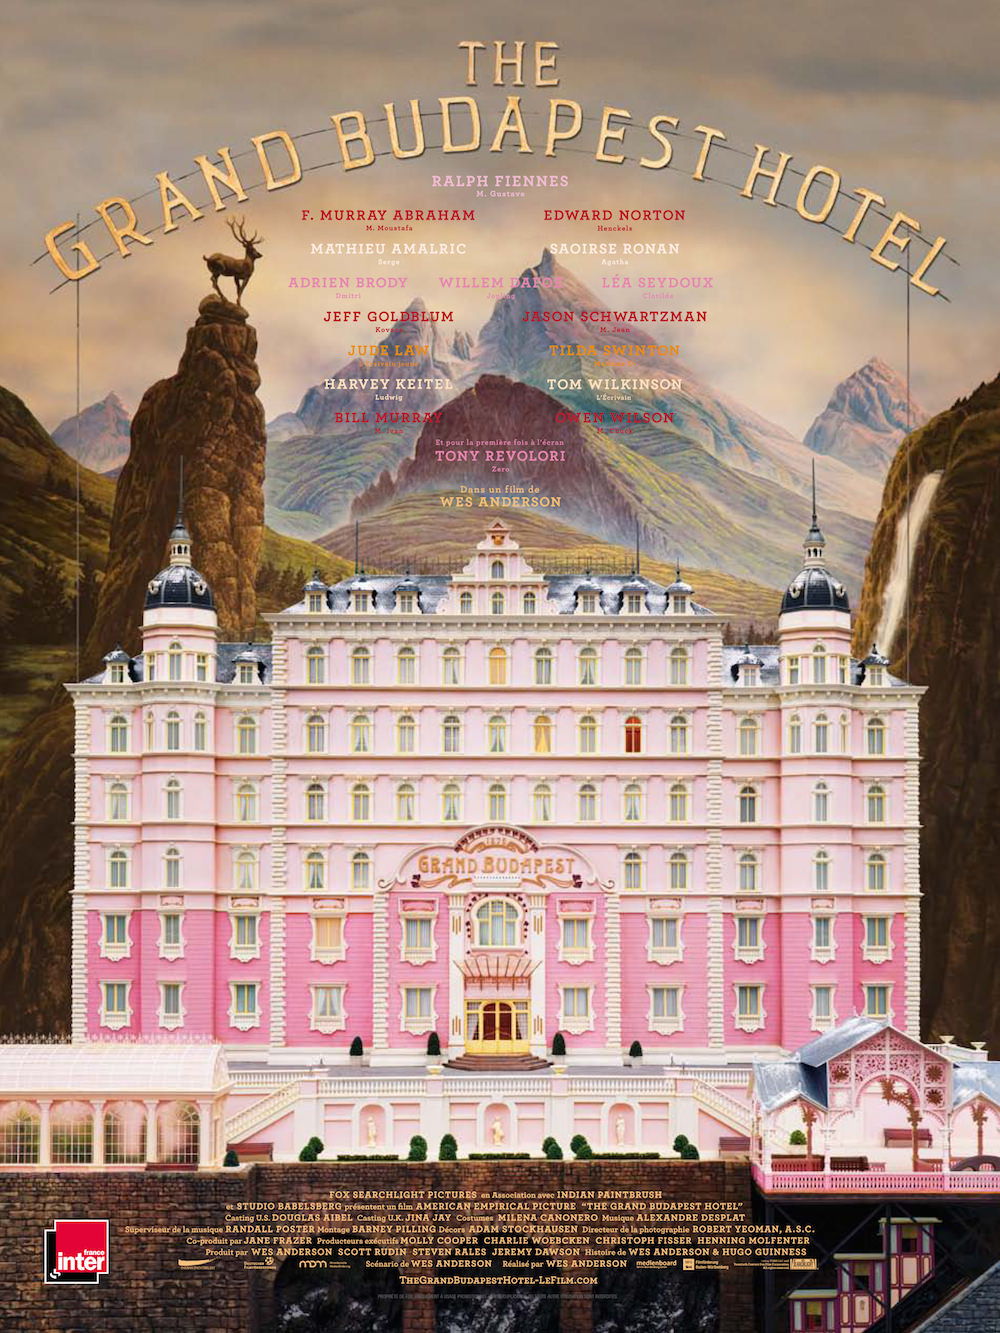 The grand budapest hotel wes anderson